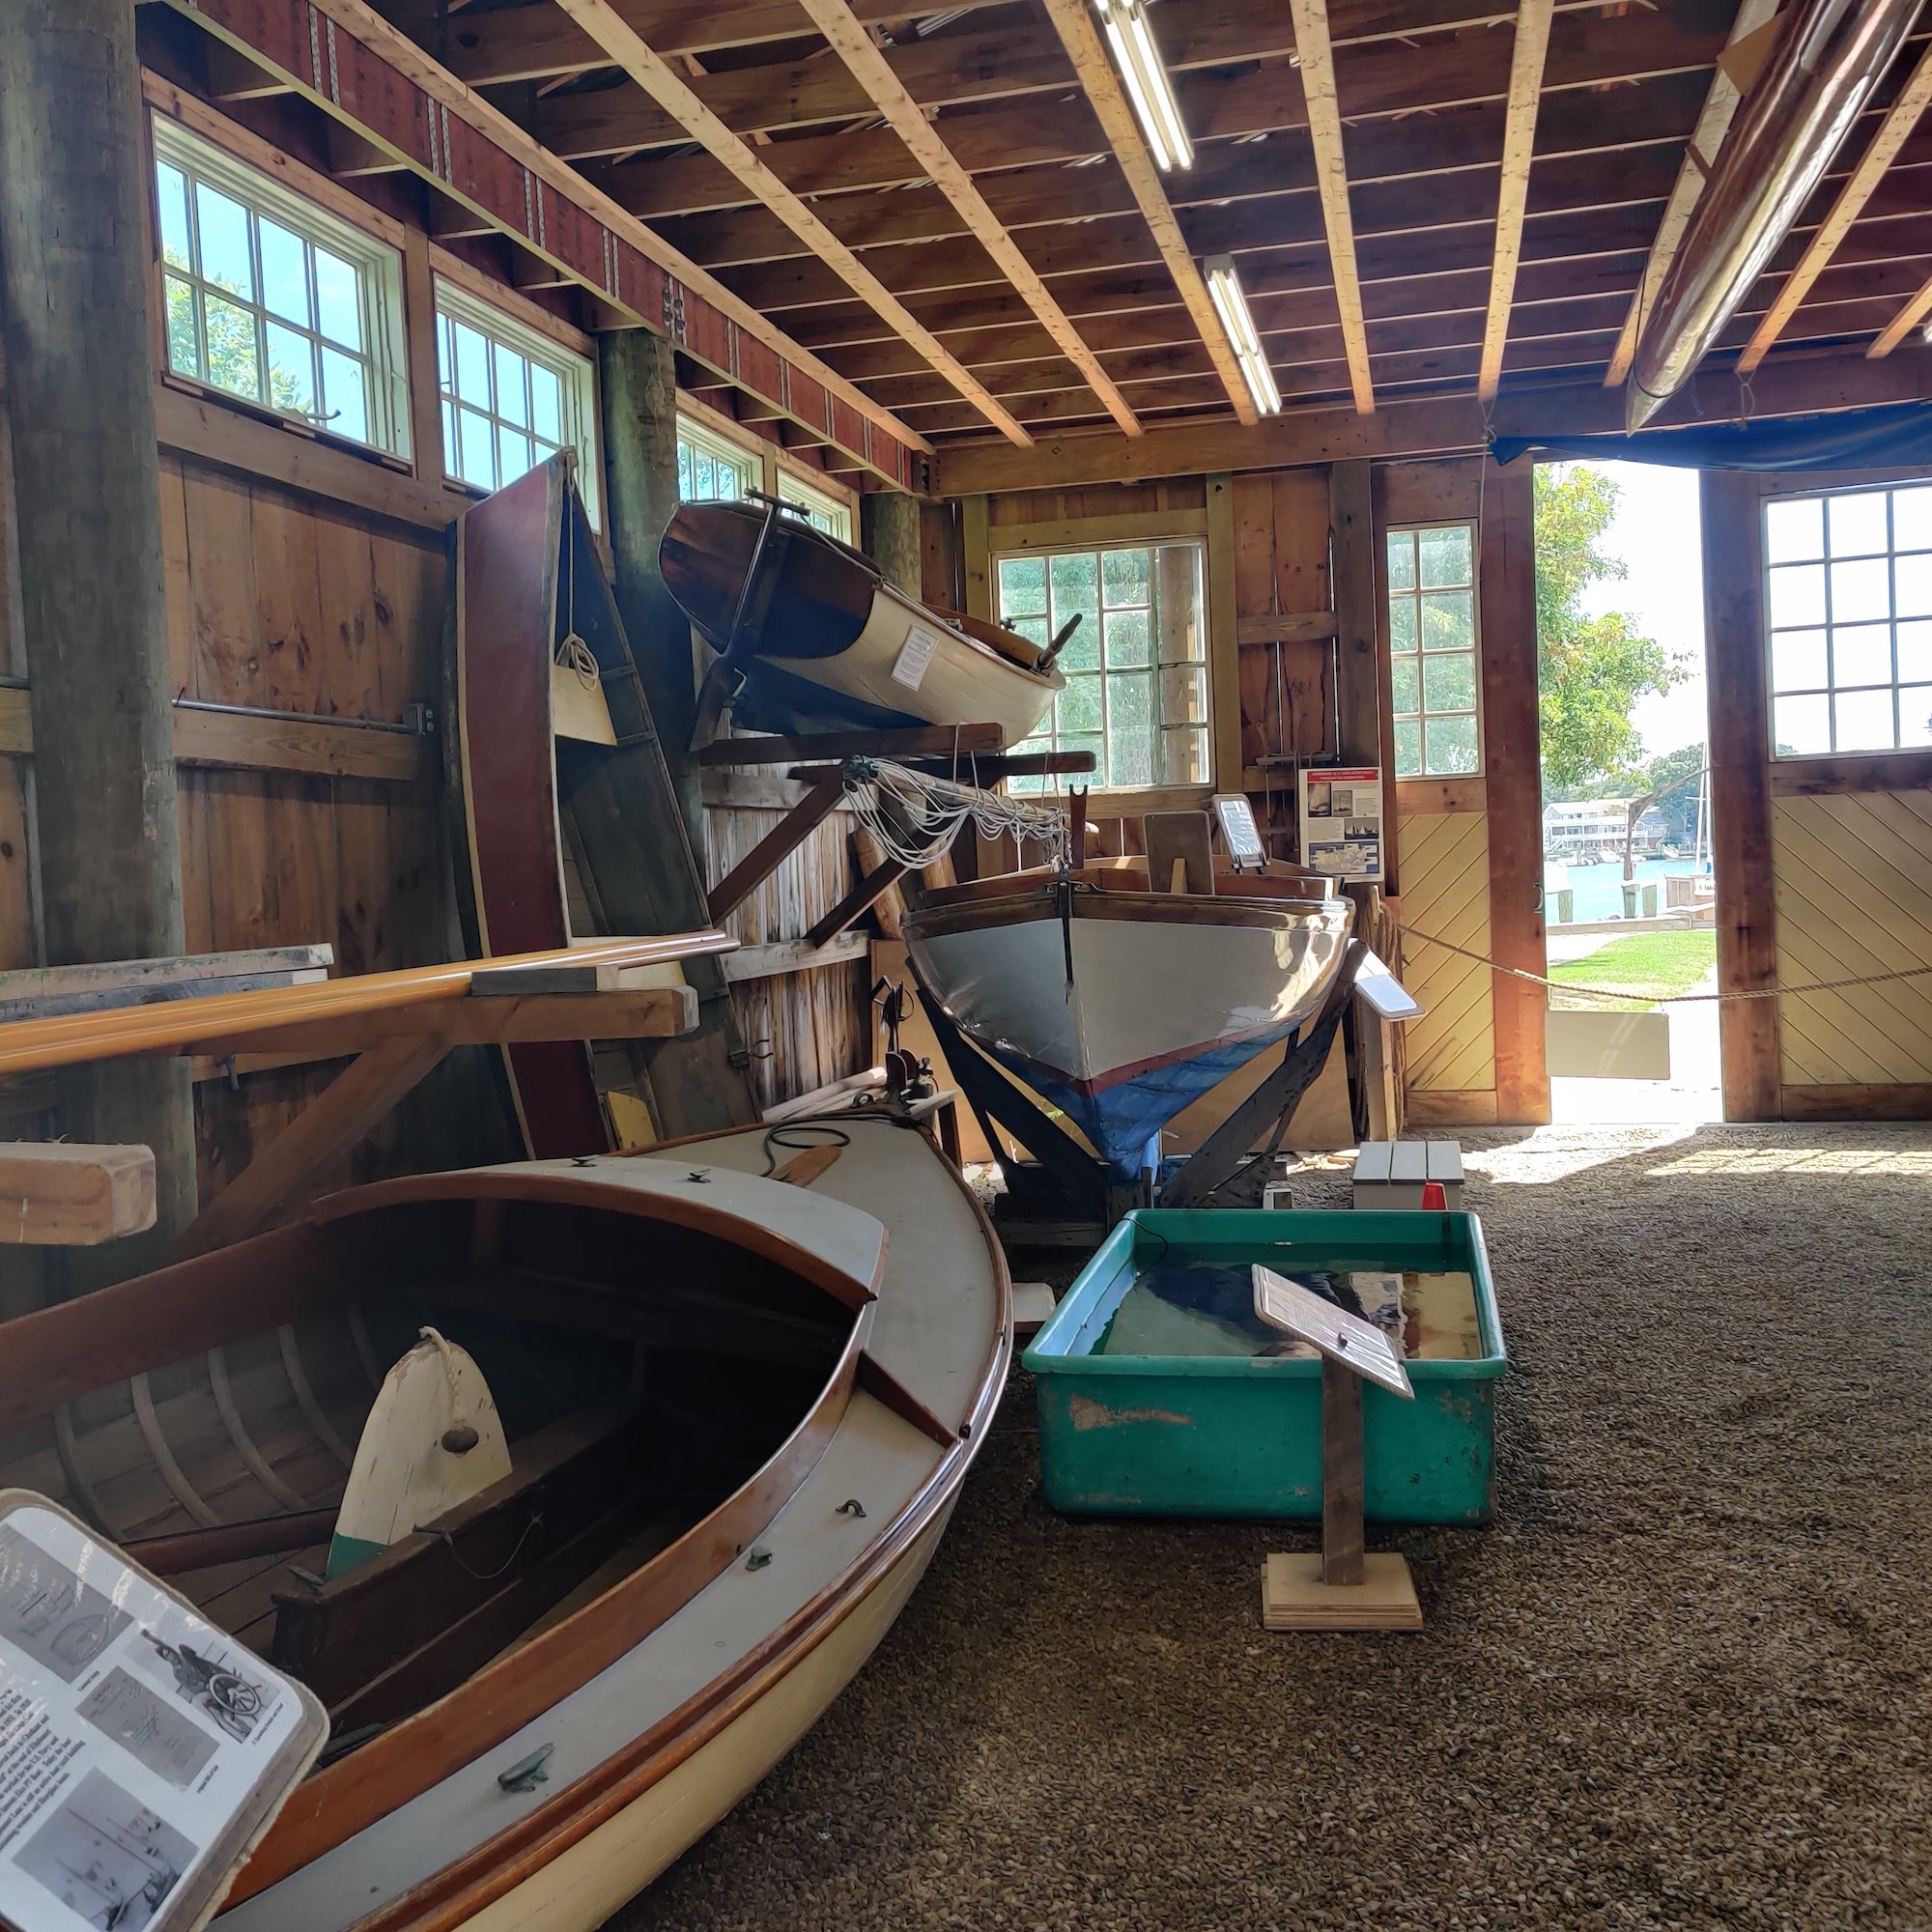  Have you visited our Historic Boat Barn? We have every Cape Cod wood boat represented — some boats over 100 years old. &nbsp; A must-see if you love Cape Cod and maritime history! 